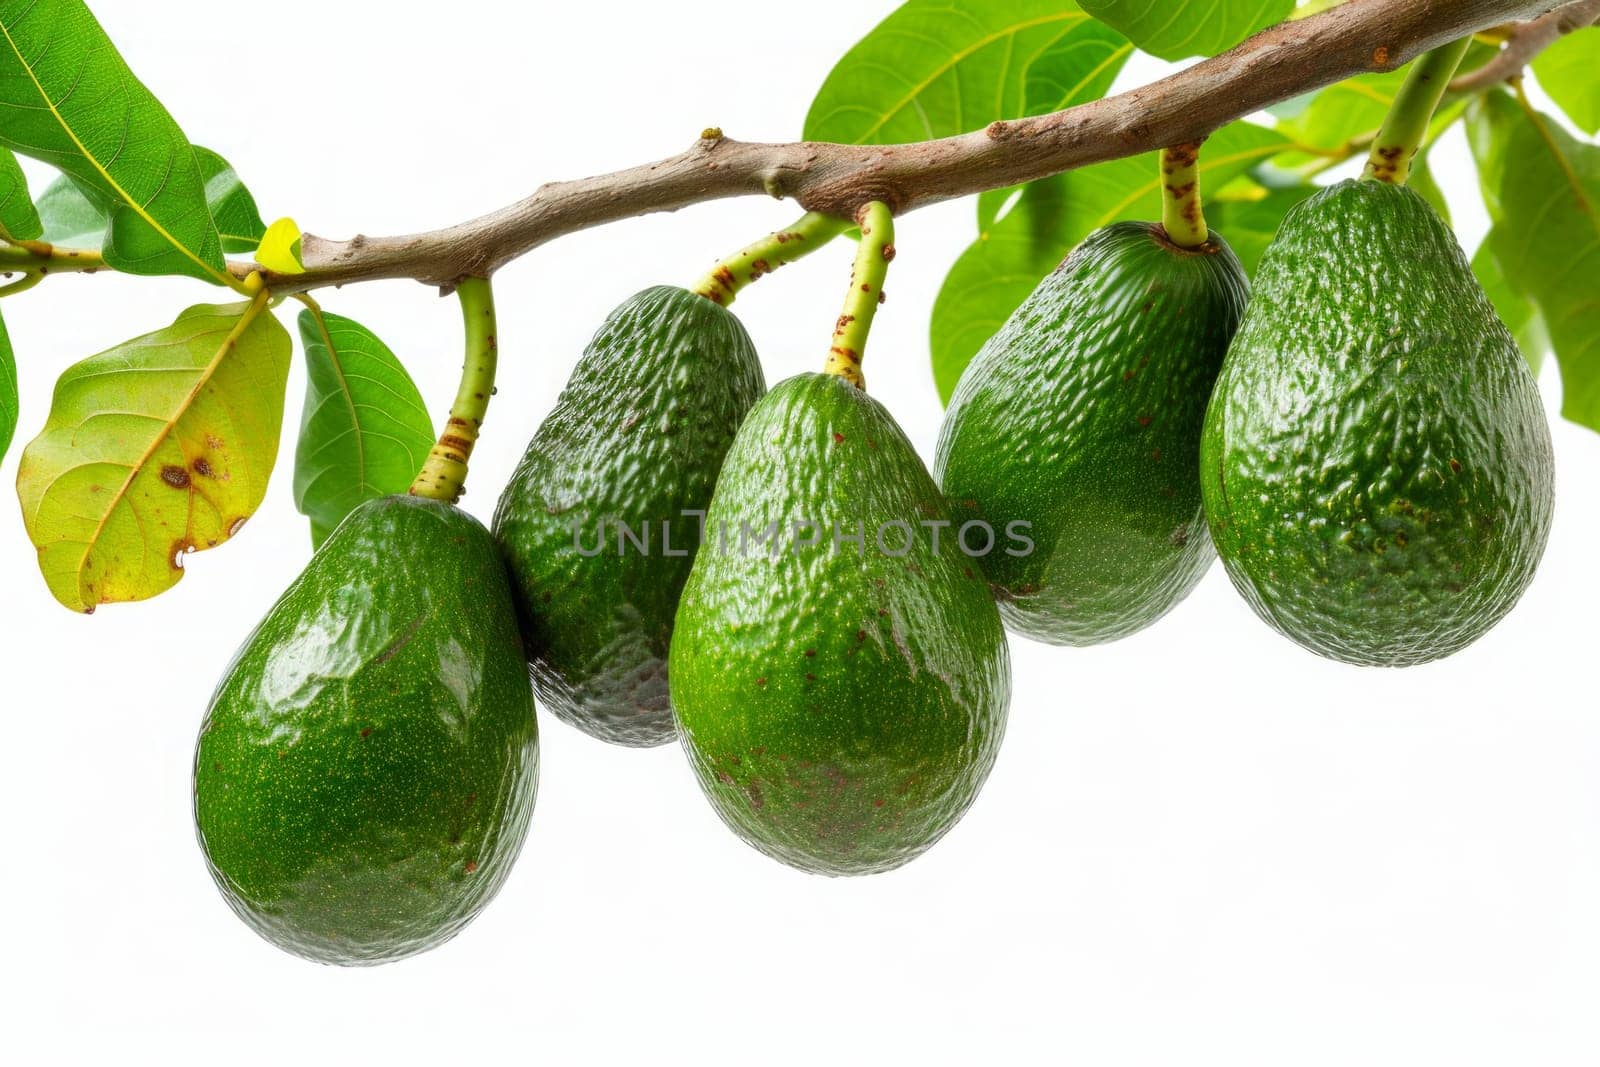 avocados in the tree branch isolated on white background, also known as alligator pear or butter fruit by papatonic